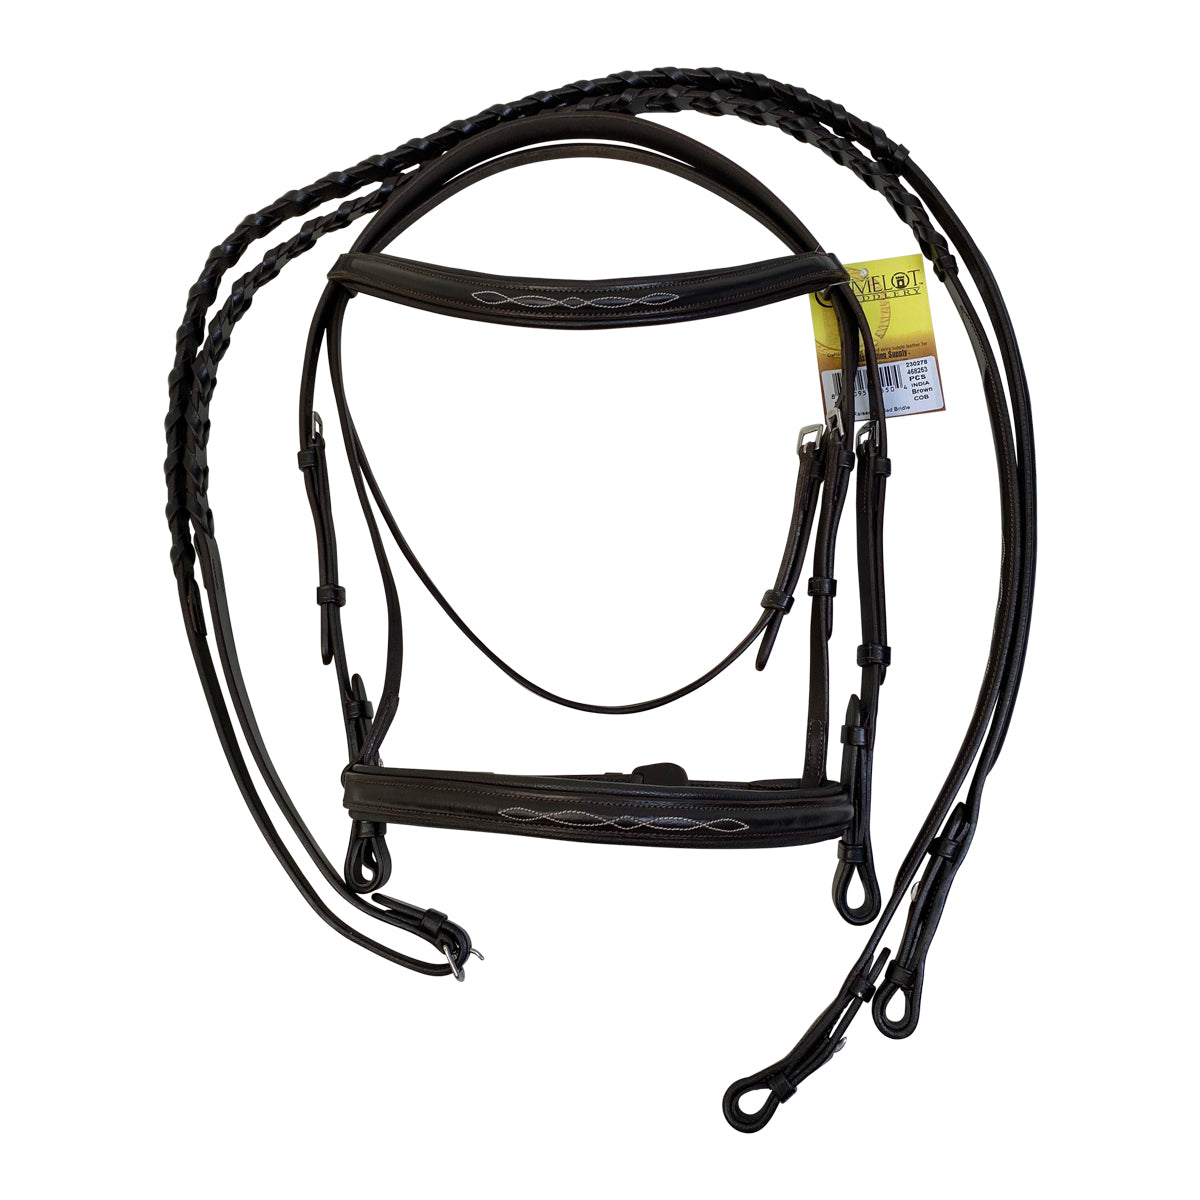 Camelot 'Fancy Raised' Bridle in Brown